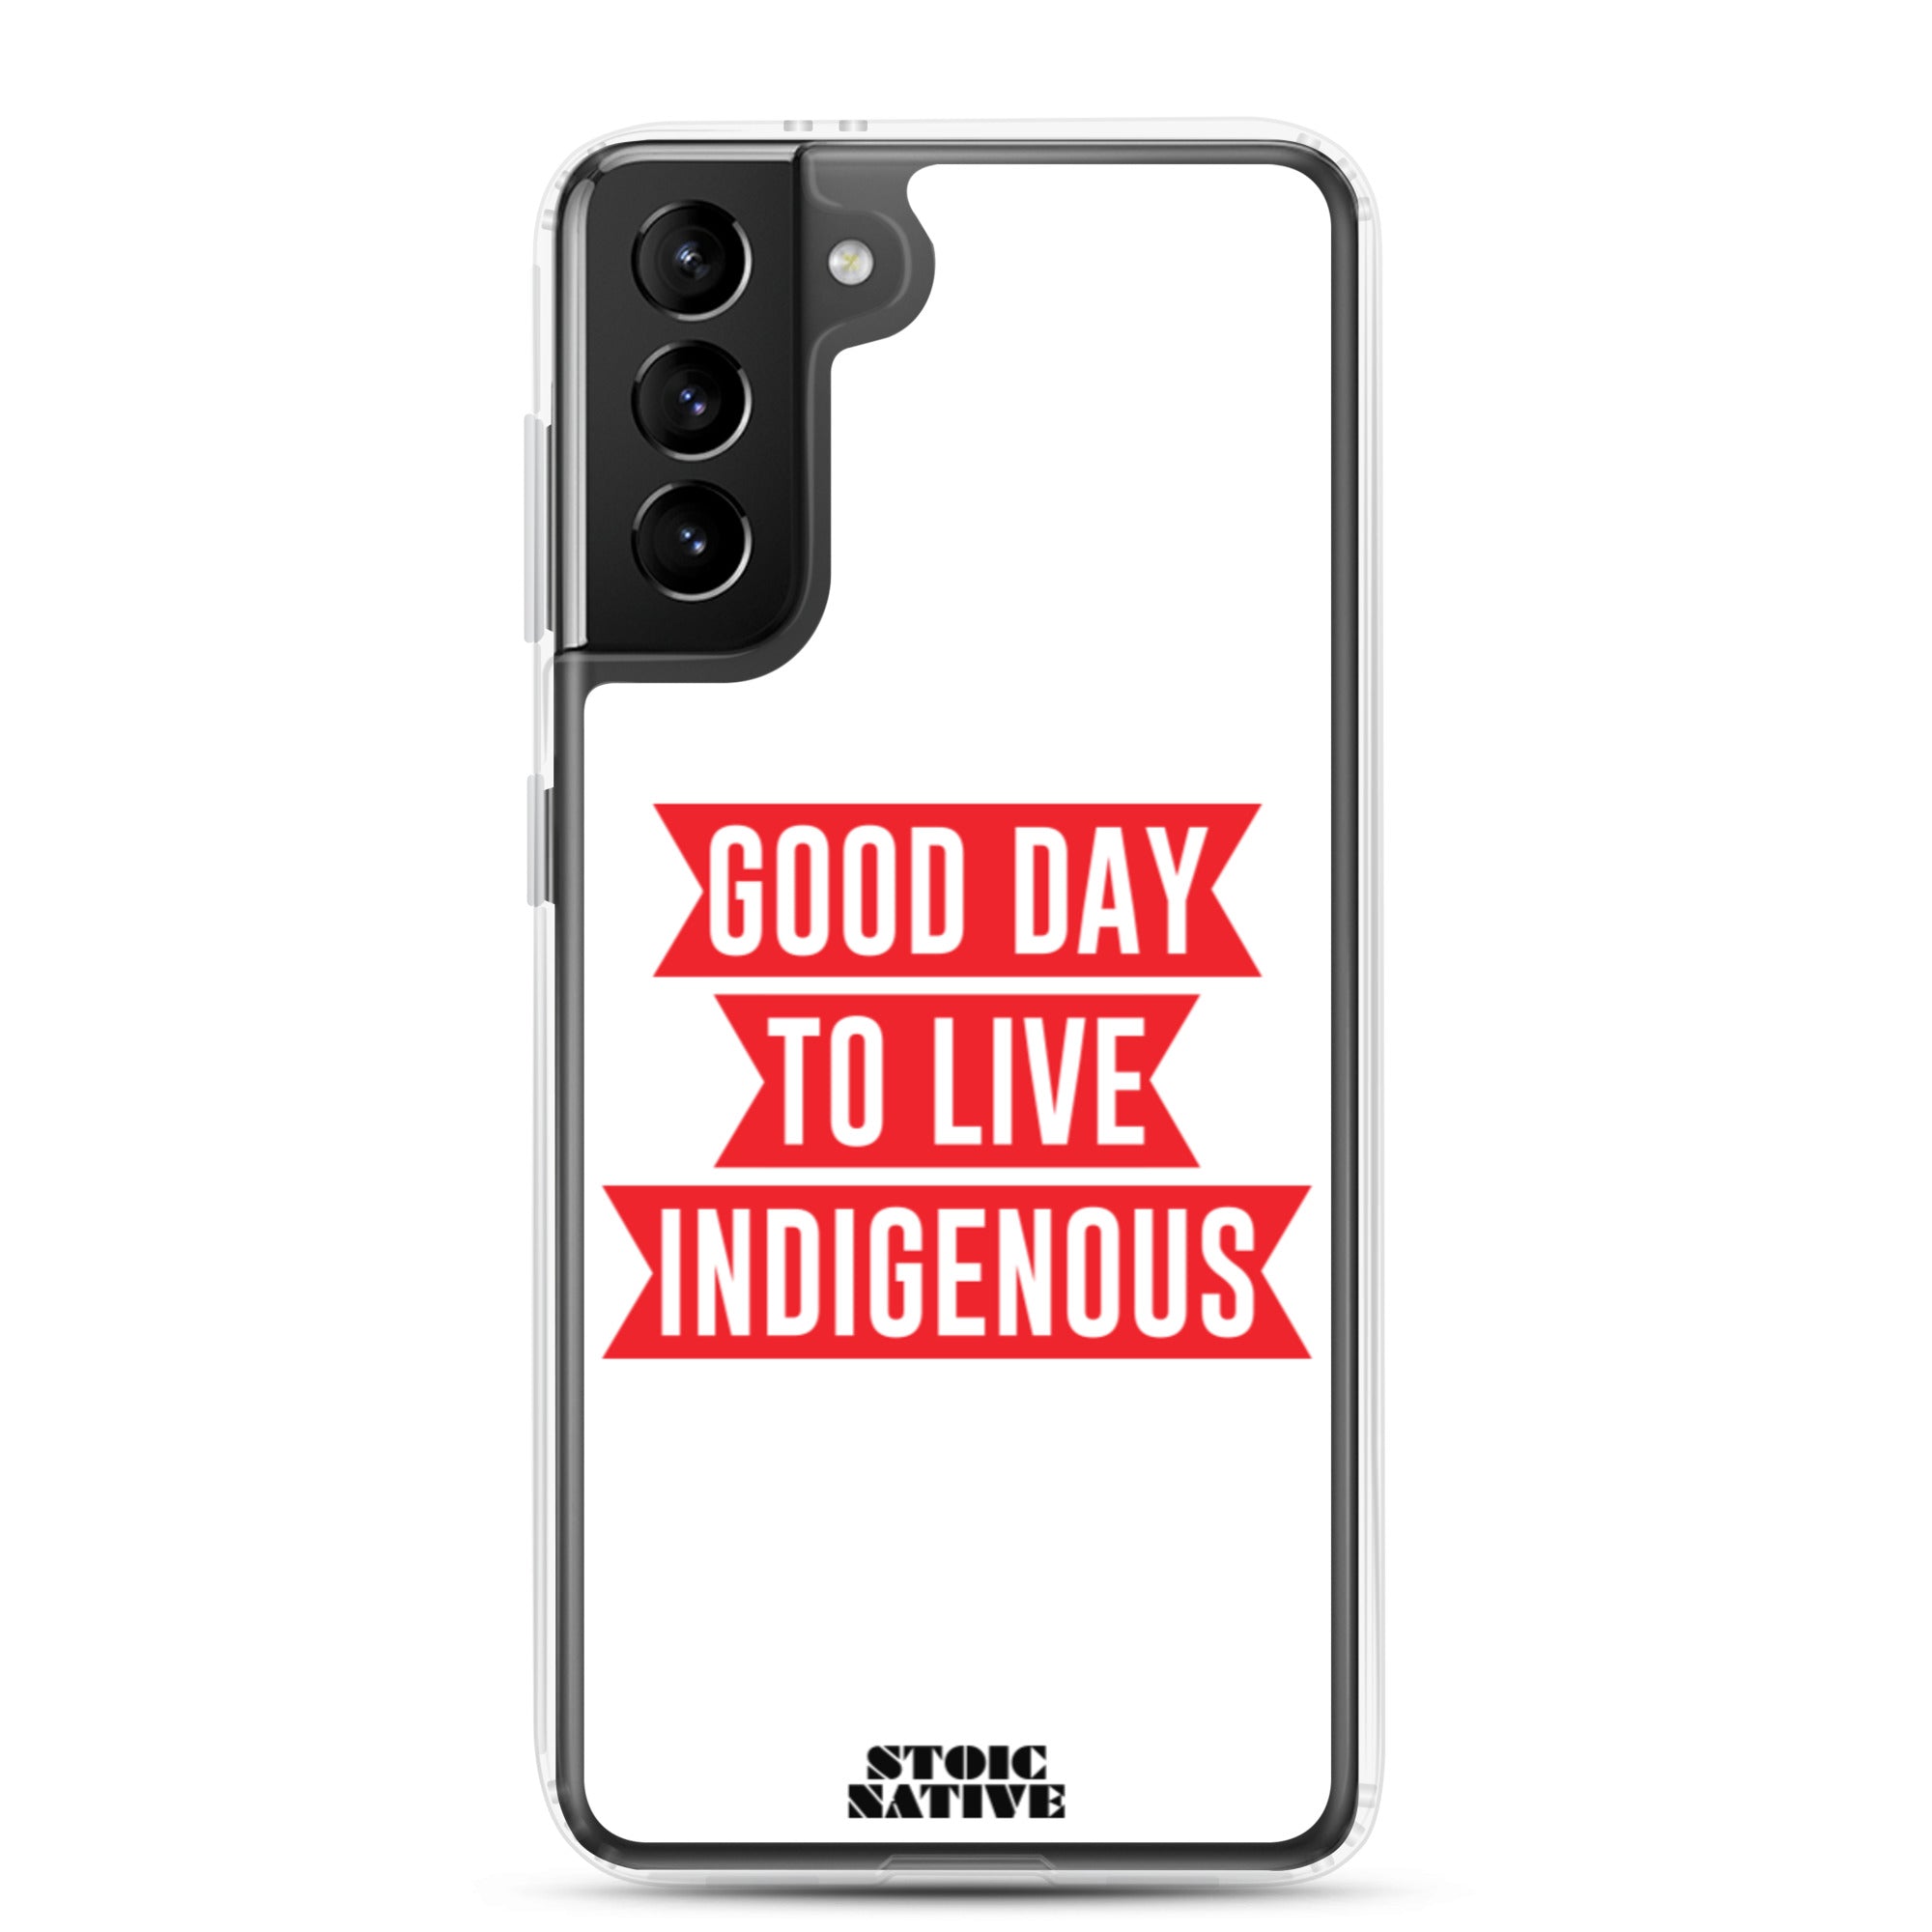 Good Day To Live Indigenous Samsung Case